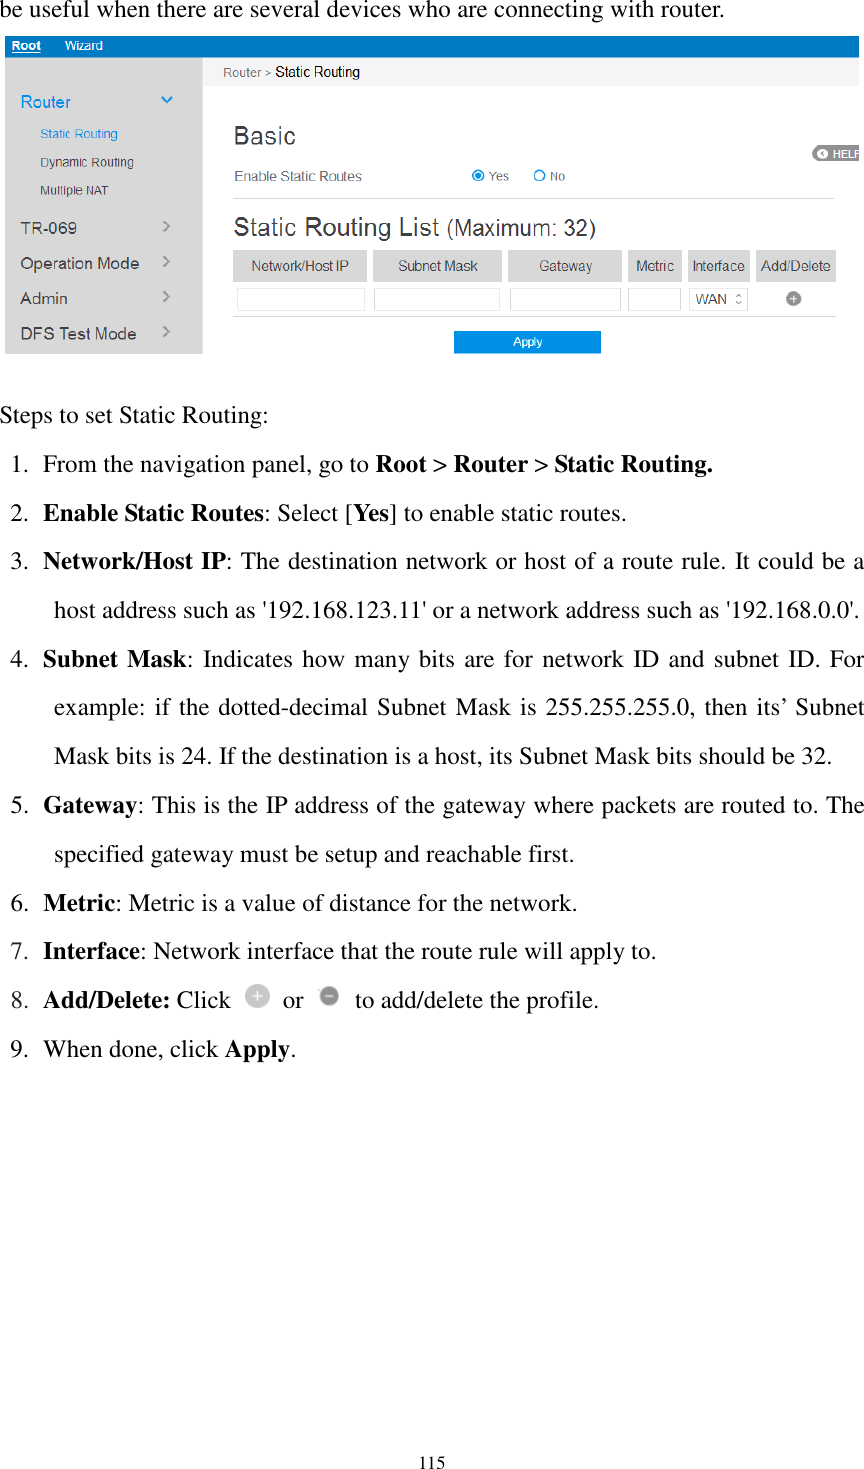  115 be useful when there are several devices who are connecting with router.     Steps to set Static Routing: 1. From the navigation panel, go to Root &gt; Router &gt; Static Routing. 2. Enable Static Routes: Select [Yes] to enable static routes. 3. Network/Host IP: The destination network or host of a route rule. It could be a host address such as &apos;192.168.123.11&apos; or a network address such as &apos;192.168.0.0&apos;. 4. Subnet Mask: Indicates how many bits are for network ID and subnet ID. For example: if the dotted-decimal Subnet Mask is 255.255.255.0, then its’ Subnet Mask bits is 24. If the destination is a host, its Subnet Mask bits should be 32. 5. Gateway: This is the IP address of the gateway where packets are routed to. The specified gateway must be setup and reachable first. 6. Metric: Metric is a value of distance for the network. 7. Interface: Network interface that the route rule will apply to. 8. Add/Delete: Click    or    to add/delete the profile. 9. When done, click Apply. 